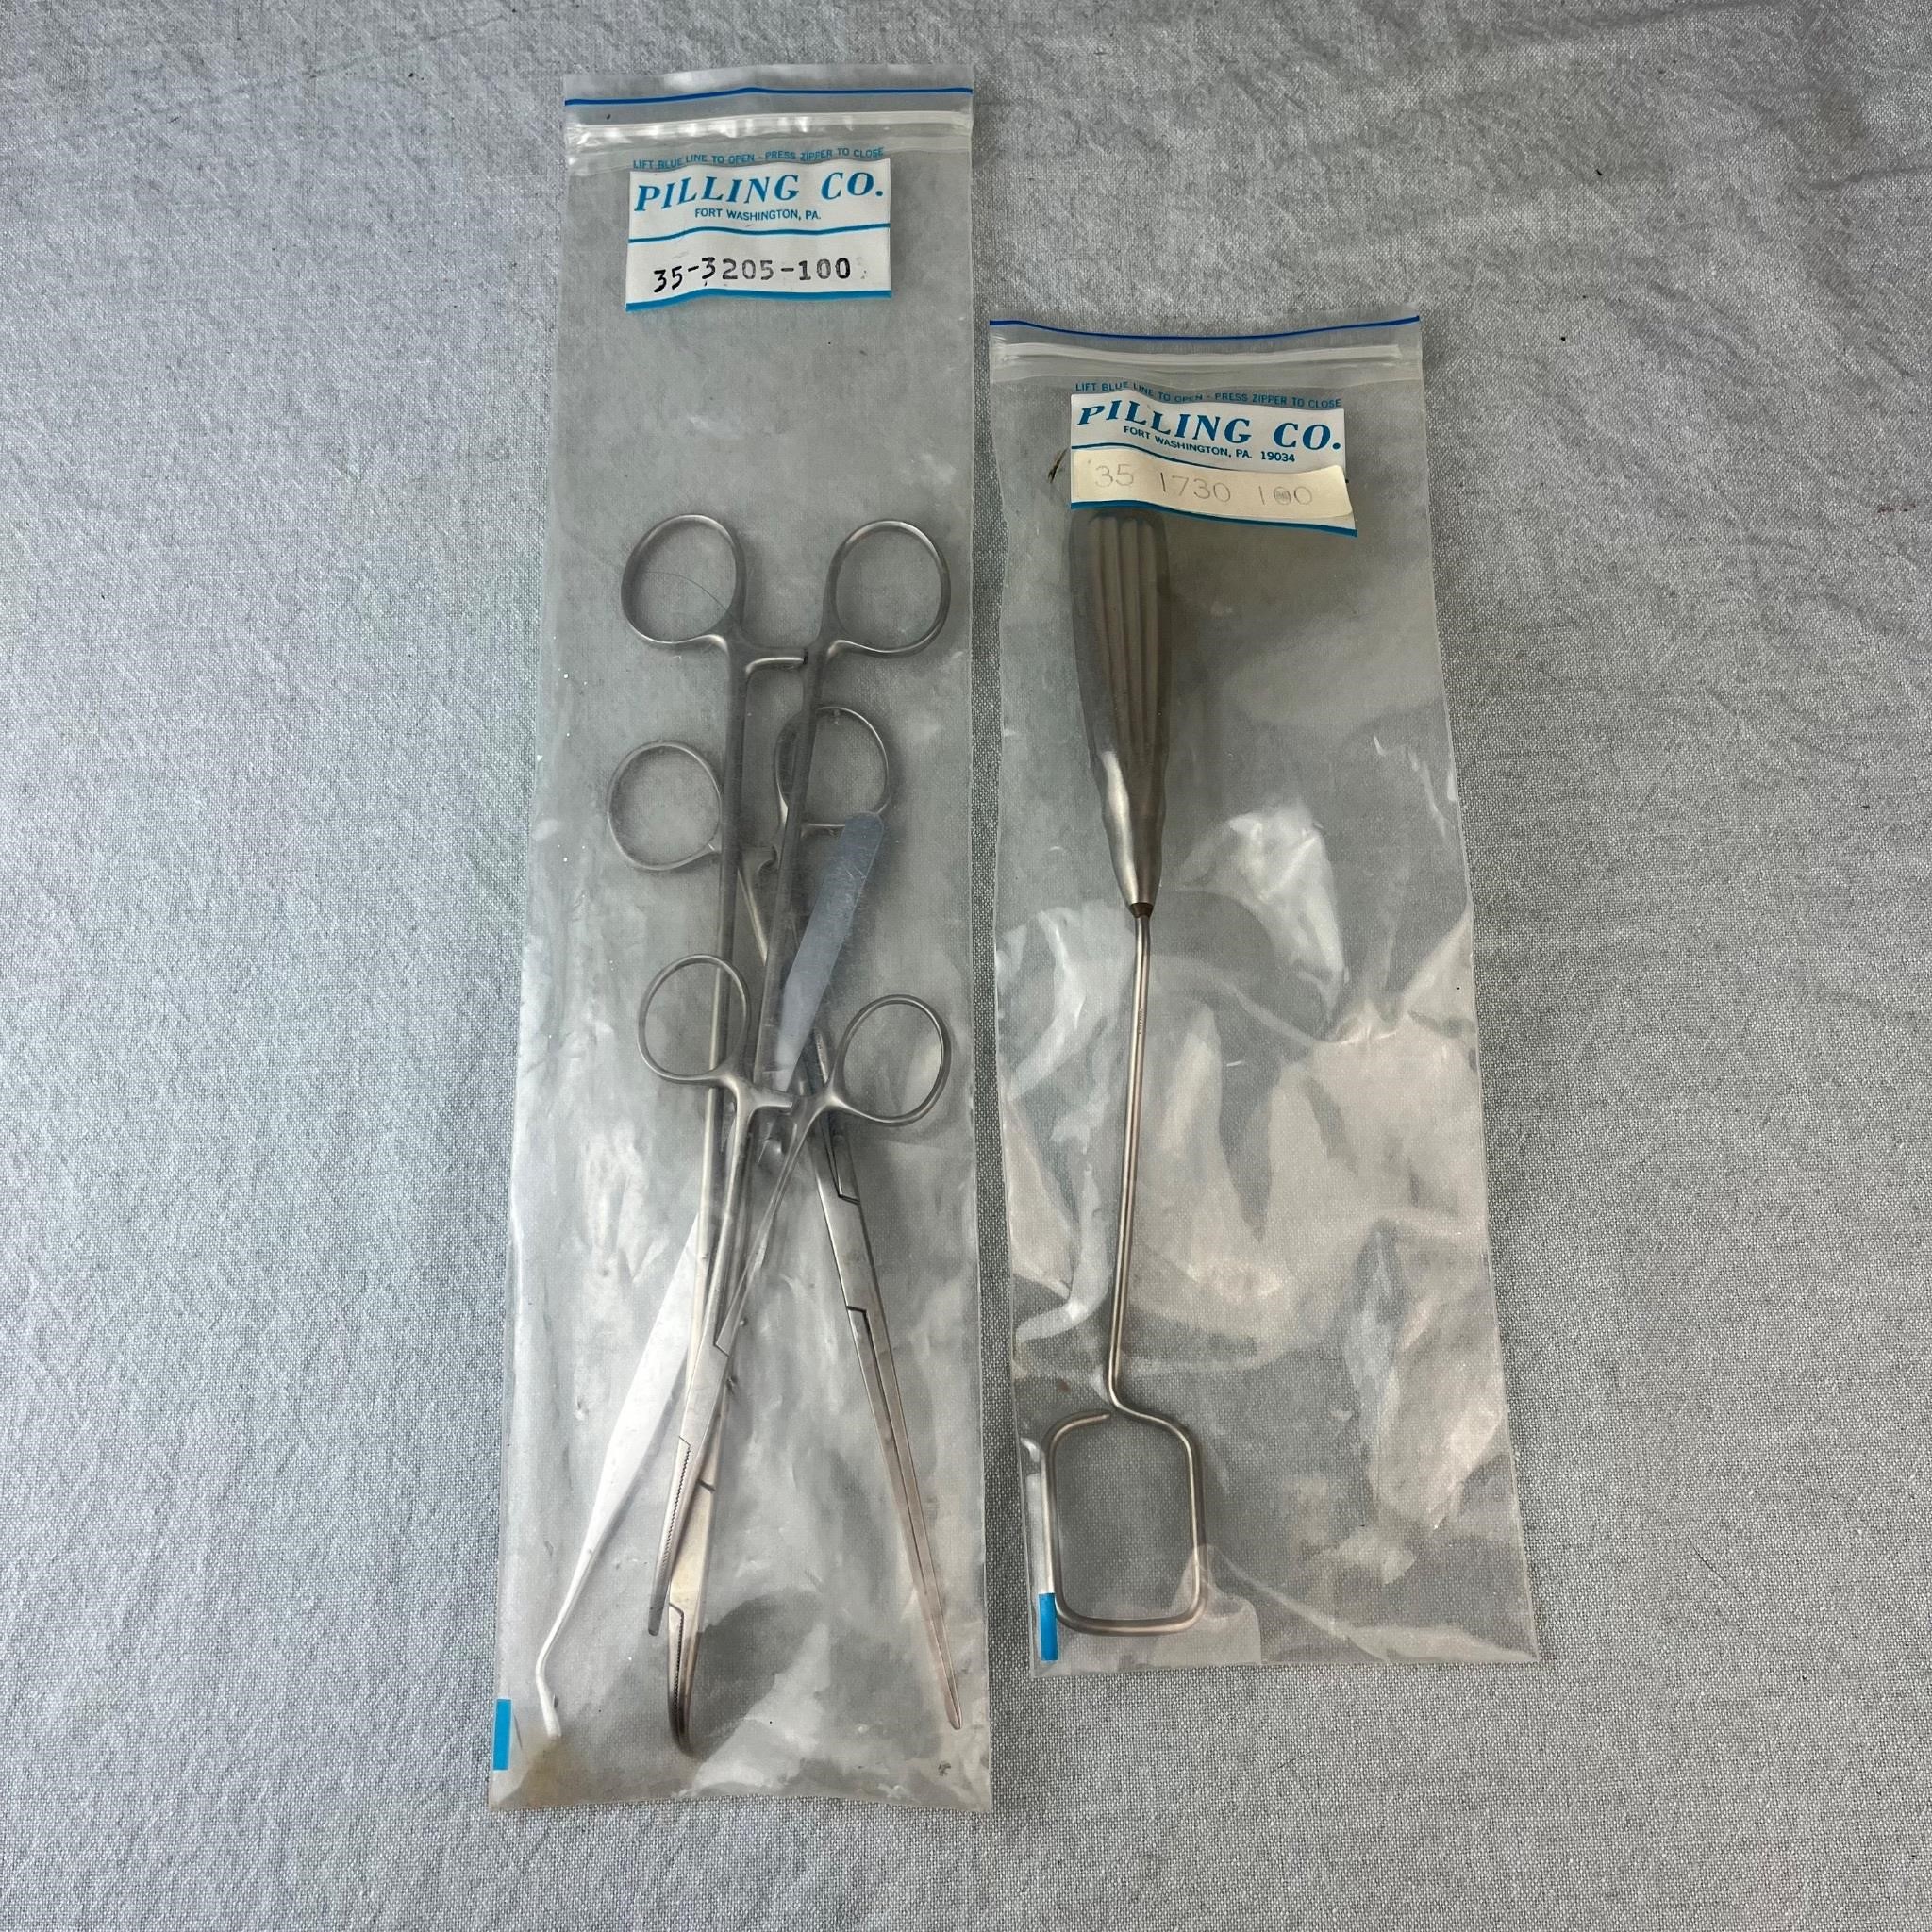 Vintage Pilling Co. Surgical Tools